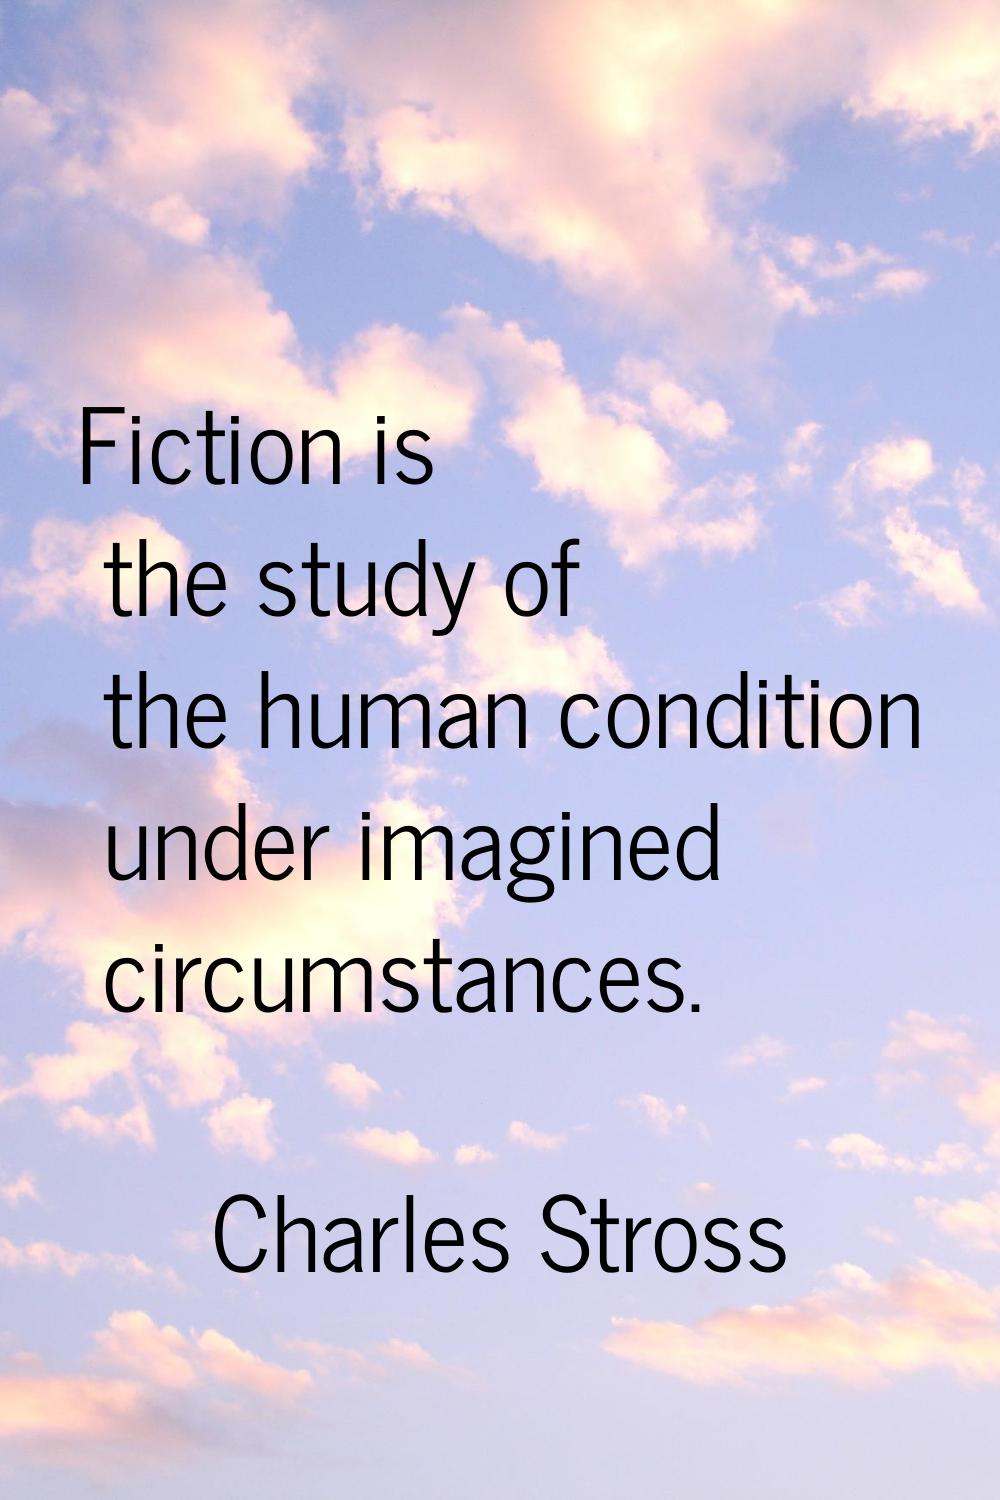 Fiction is the study of the human condition under imagined circumstances.